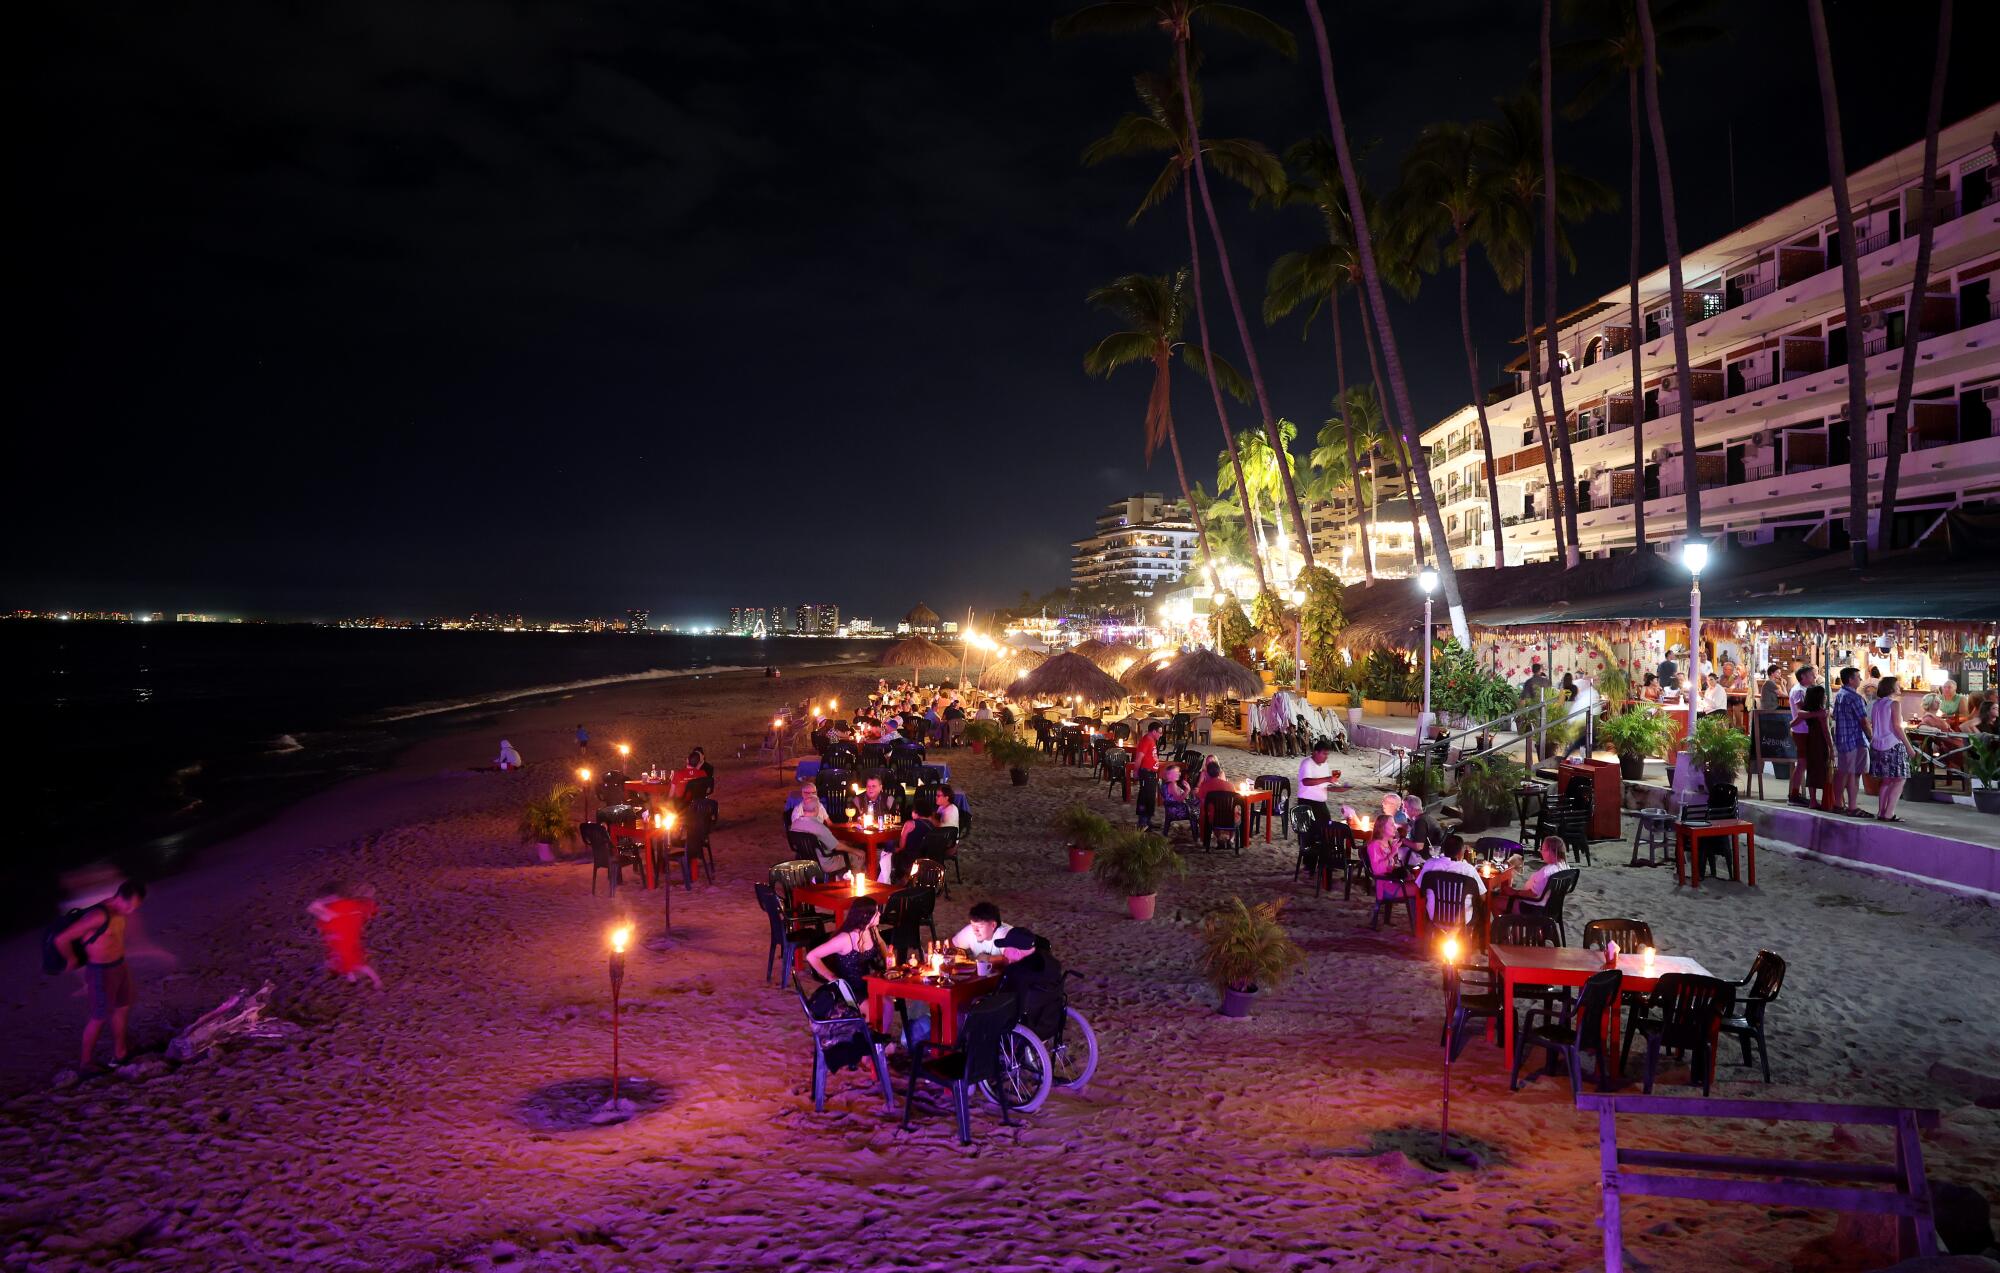 People dining on a beach under torchlight as others stroll by beachfront stores